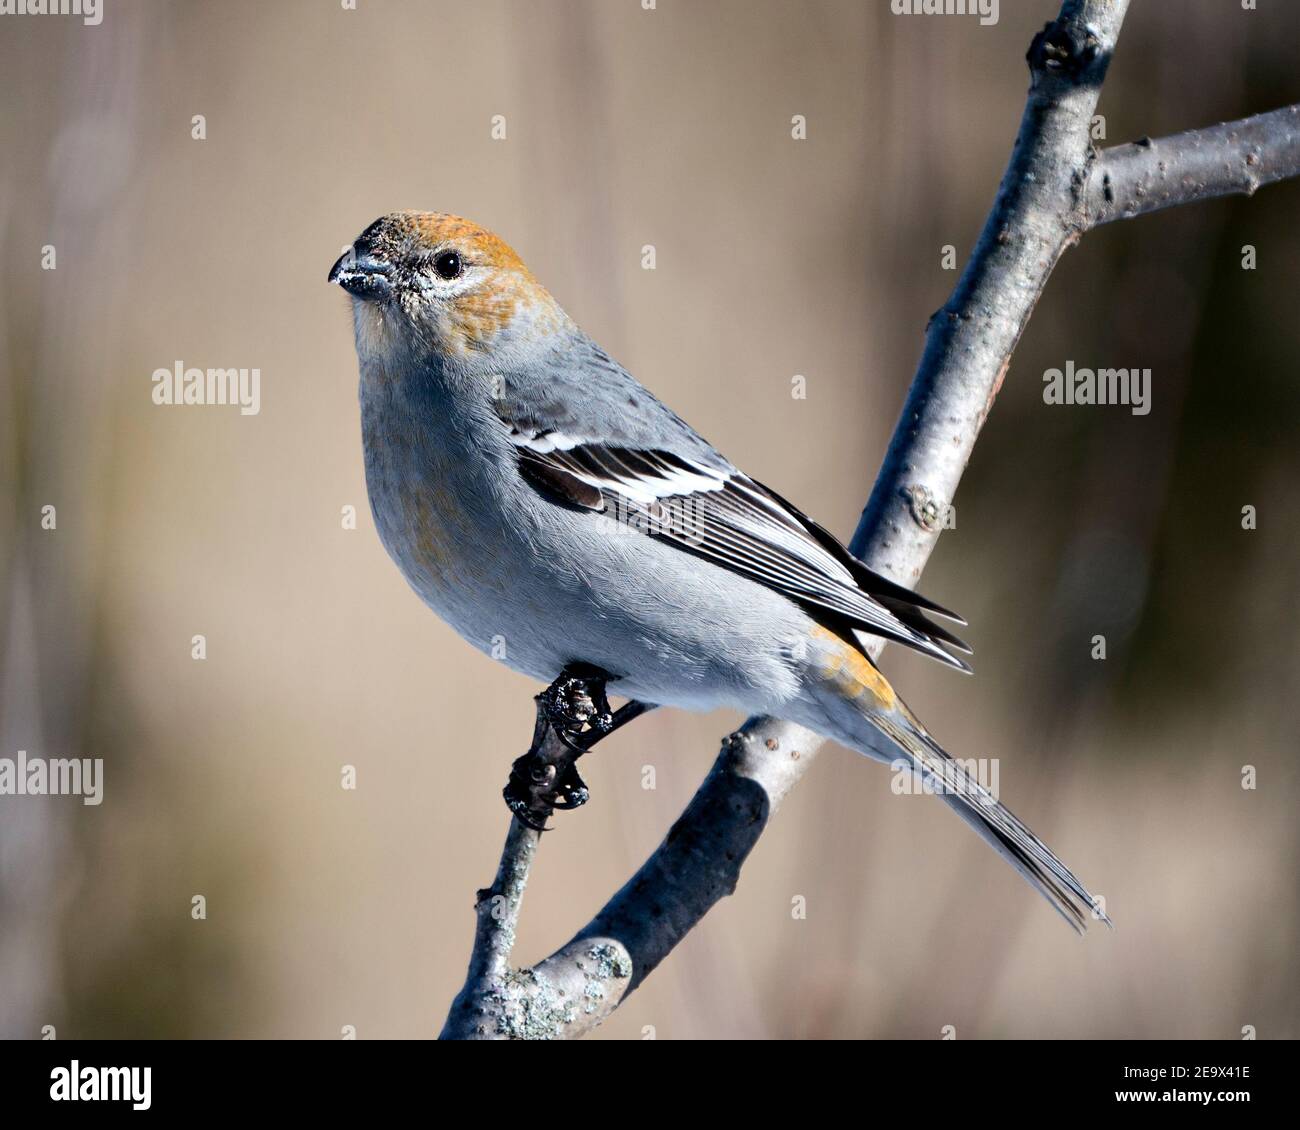 Pine Grosbeak close-up profile view, perched  with a blur background in its habitat. Image. Picture. Portrait. Pine Grosbeak Stock Photos. Stock Photo